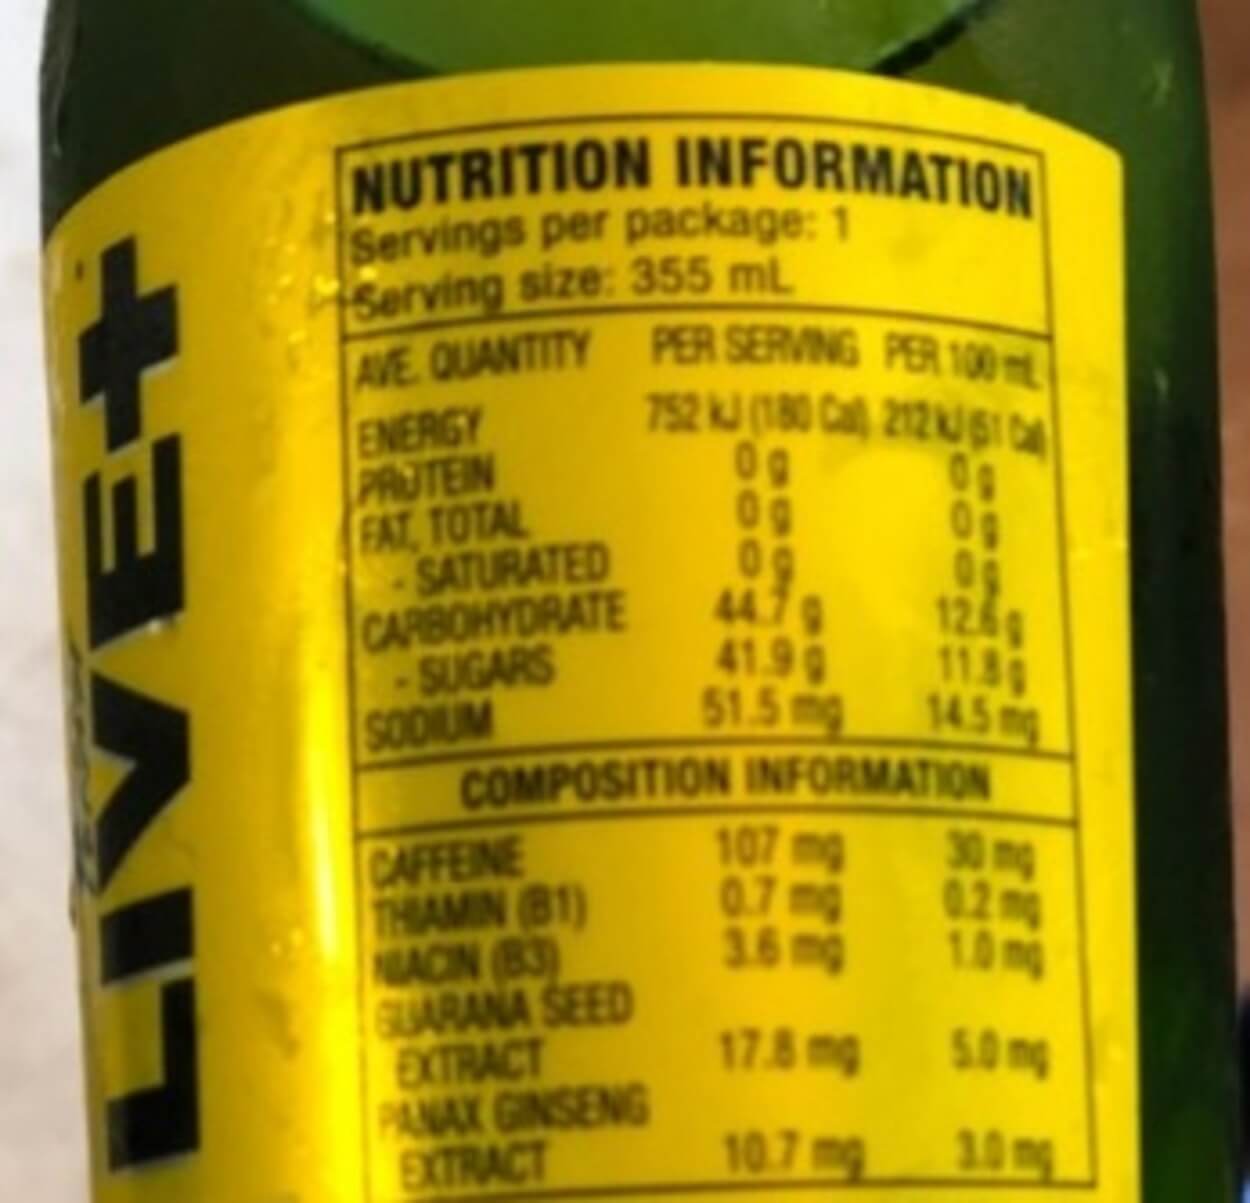 Live+ Energy nutritional facts.